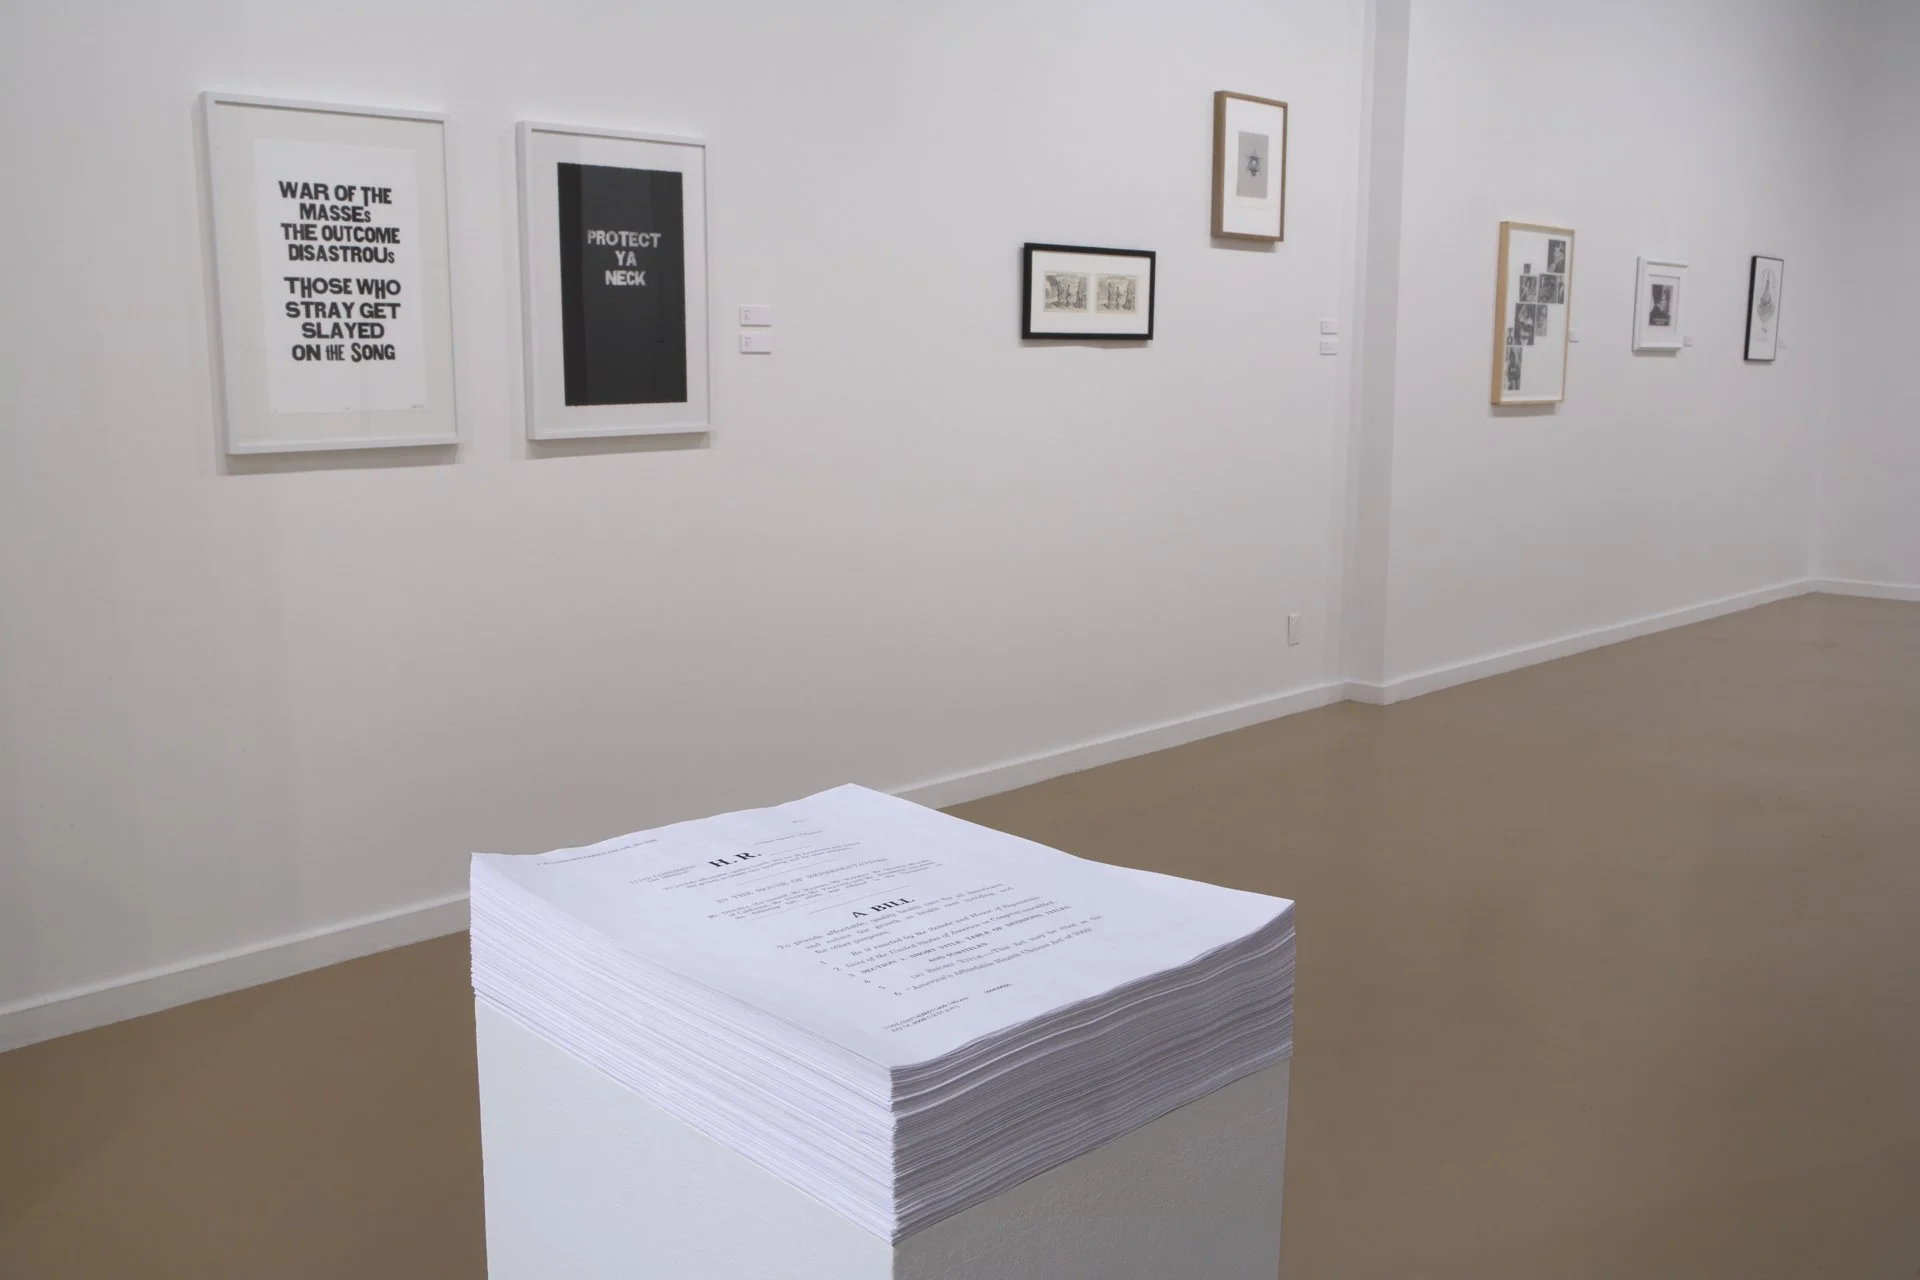 installation view of "Works on Paper 2009", Spruance Gallery